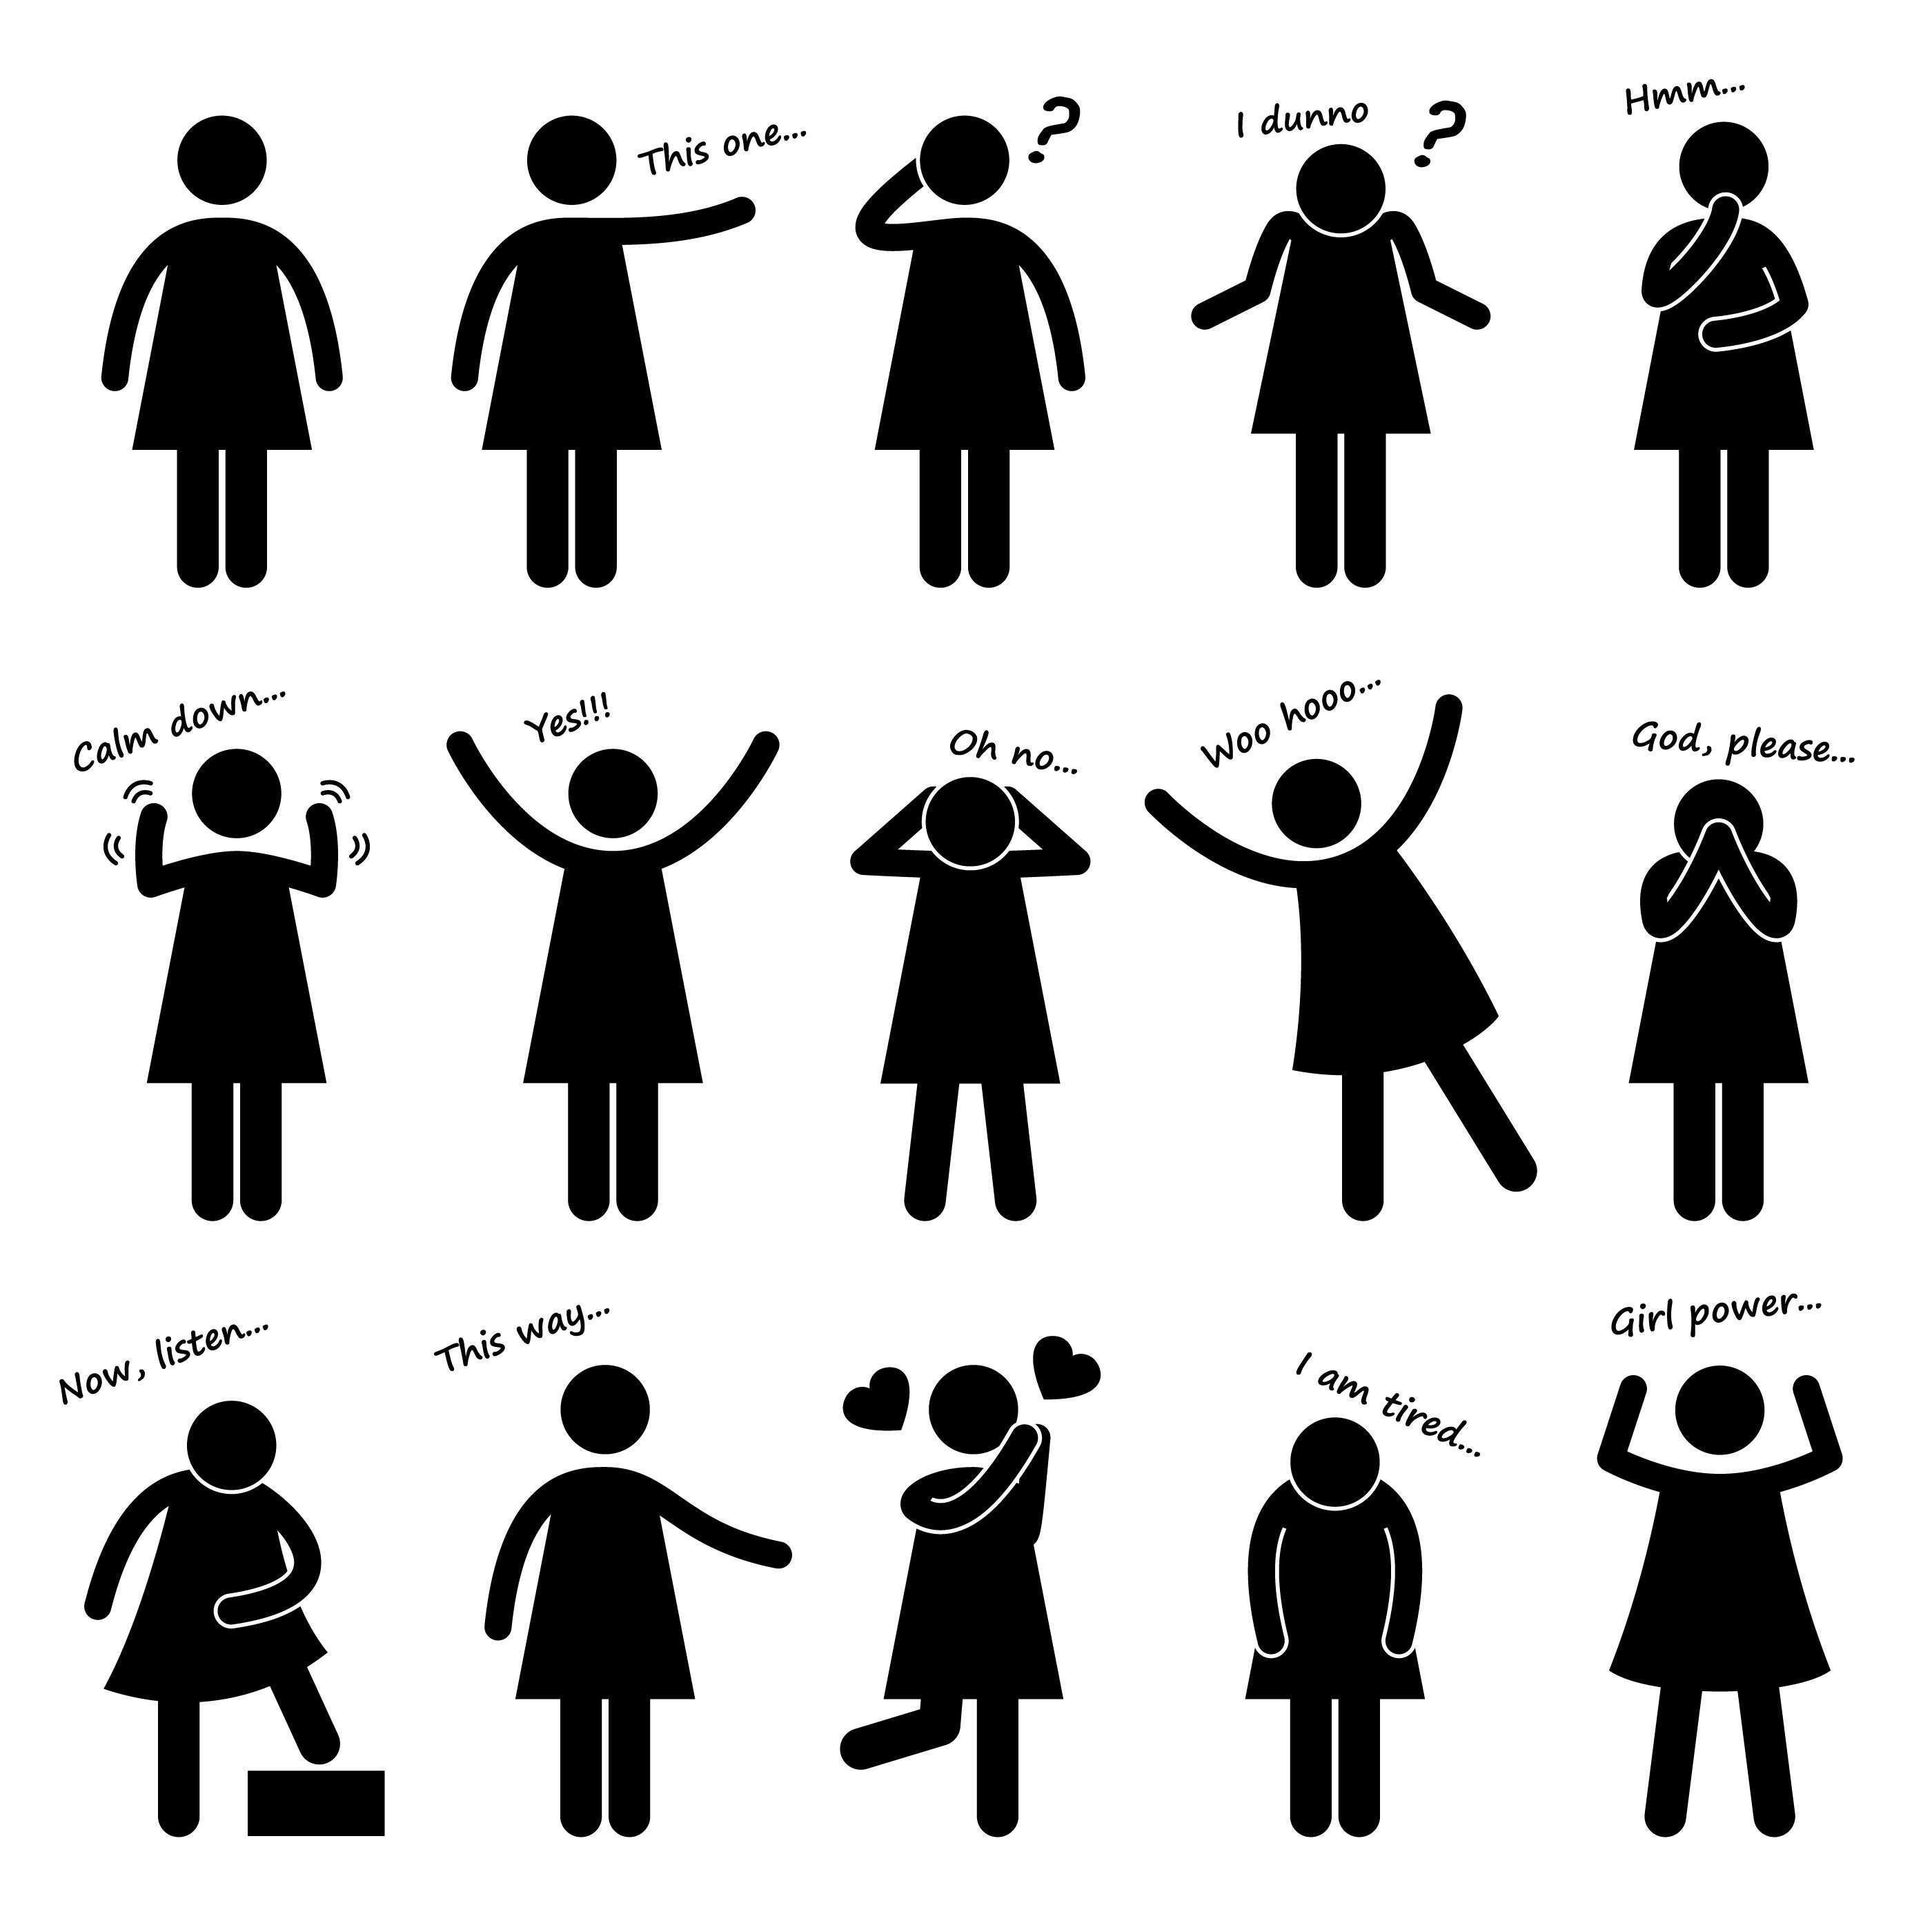 Basic Human Stick Figure Woman Women Female Girl Lady Standing Postures  Poses Standing Body Languages Gestures Download Icons PNG SVG Vector -   Norway